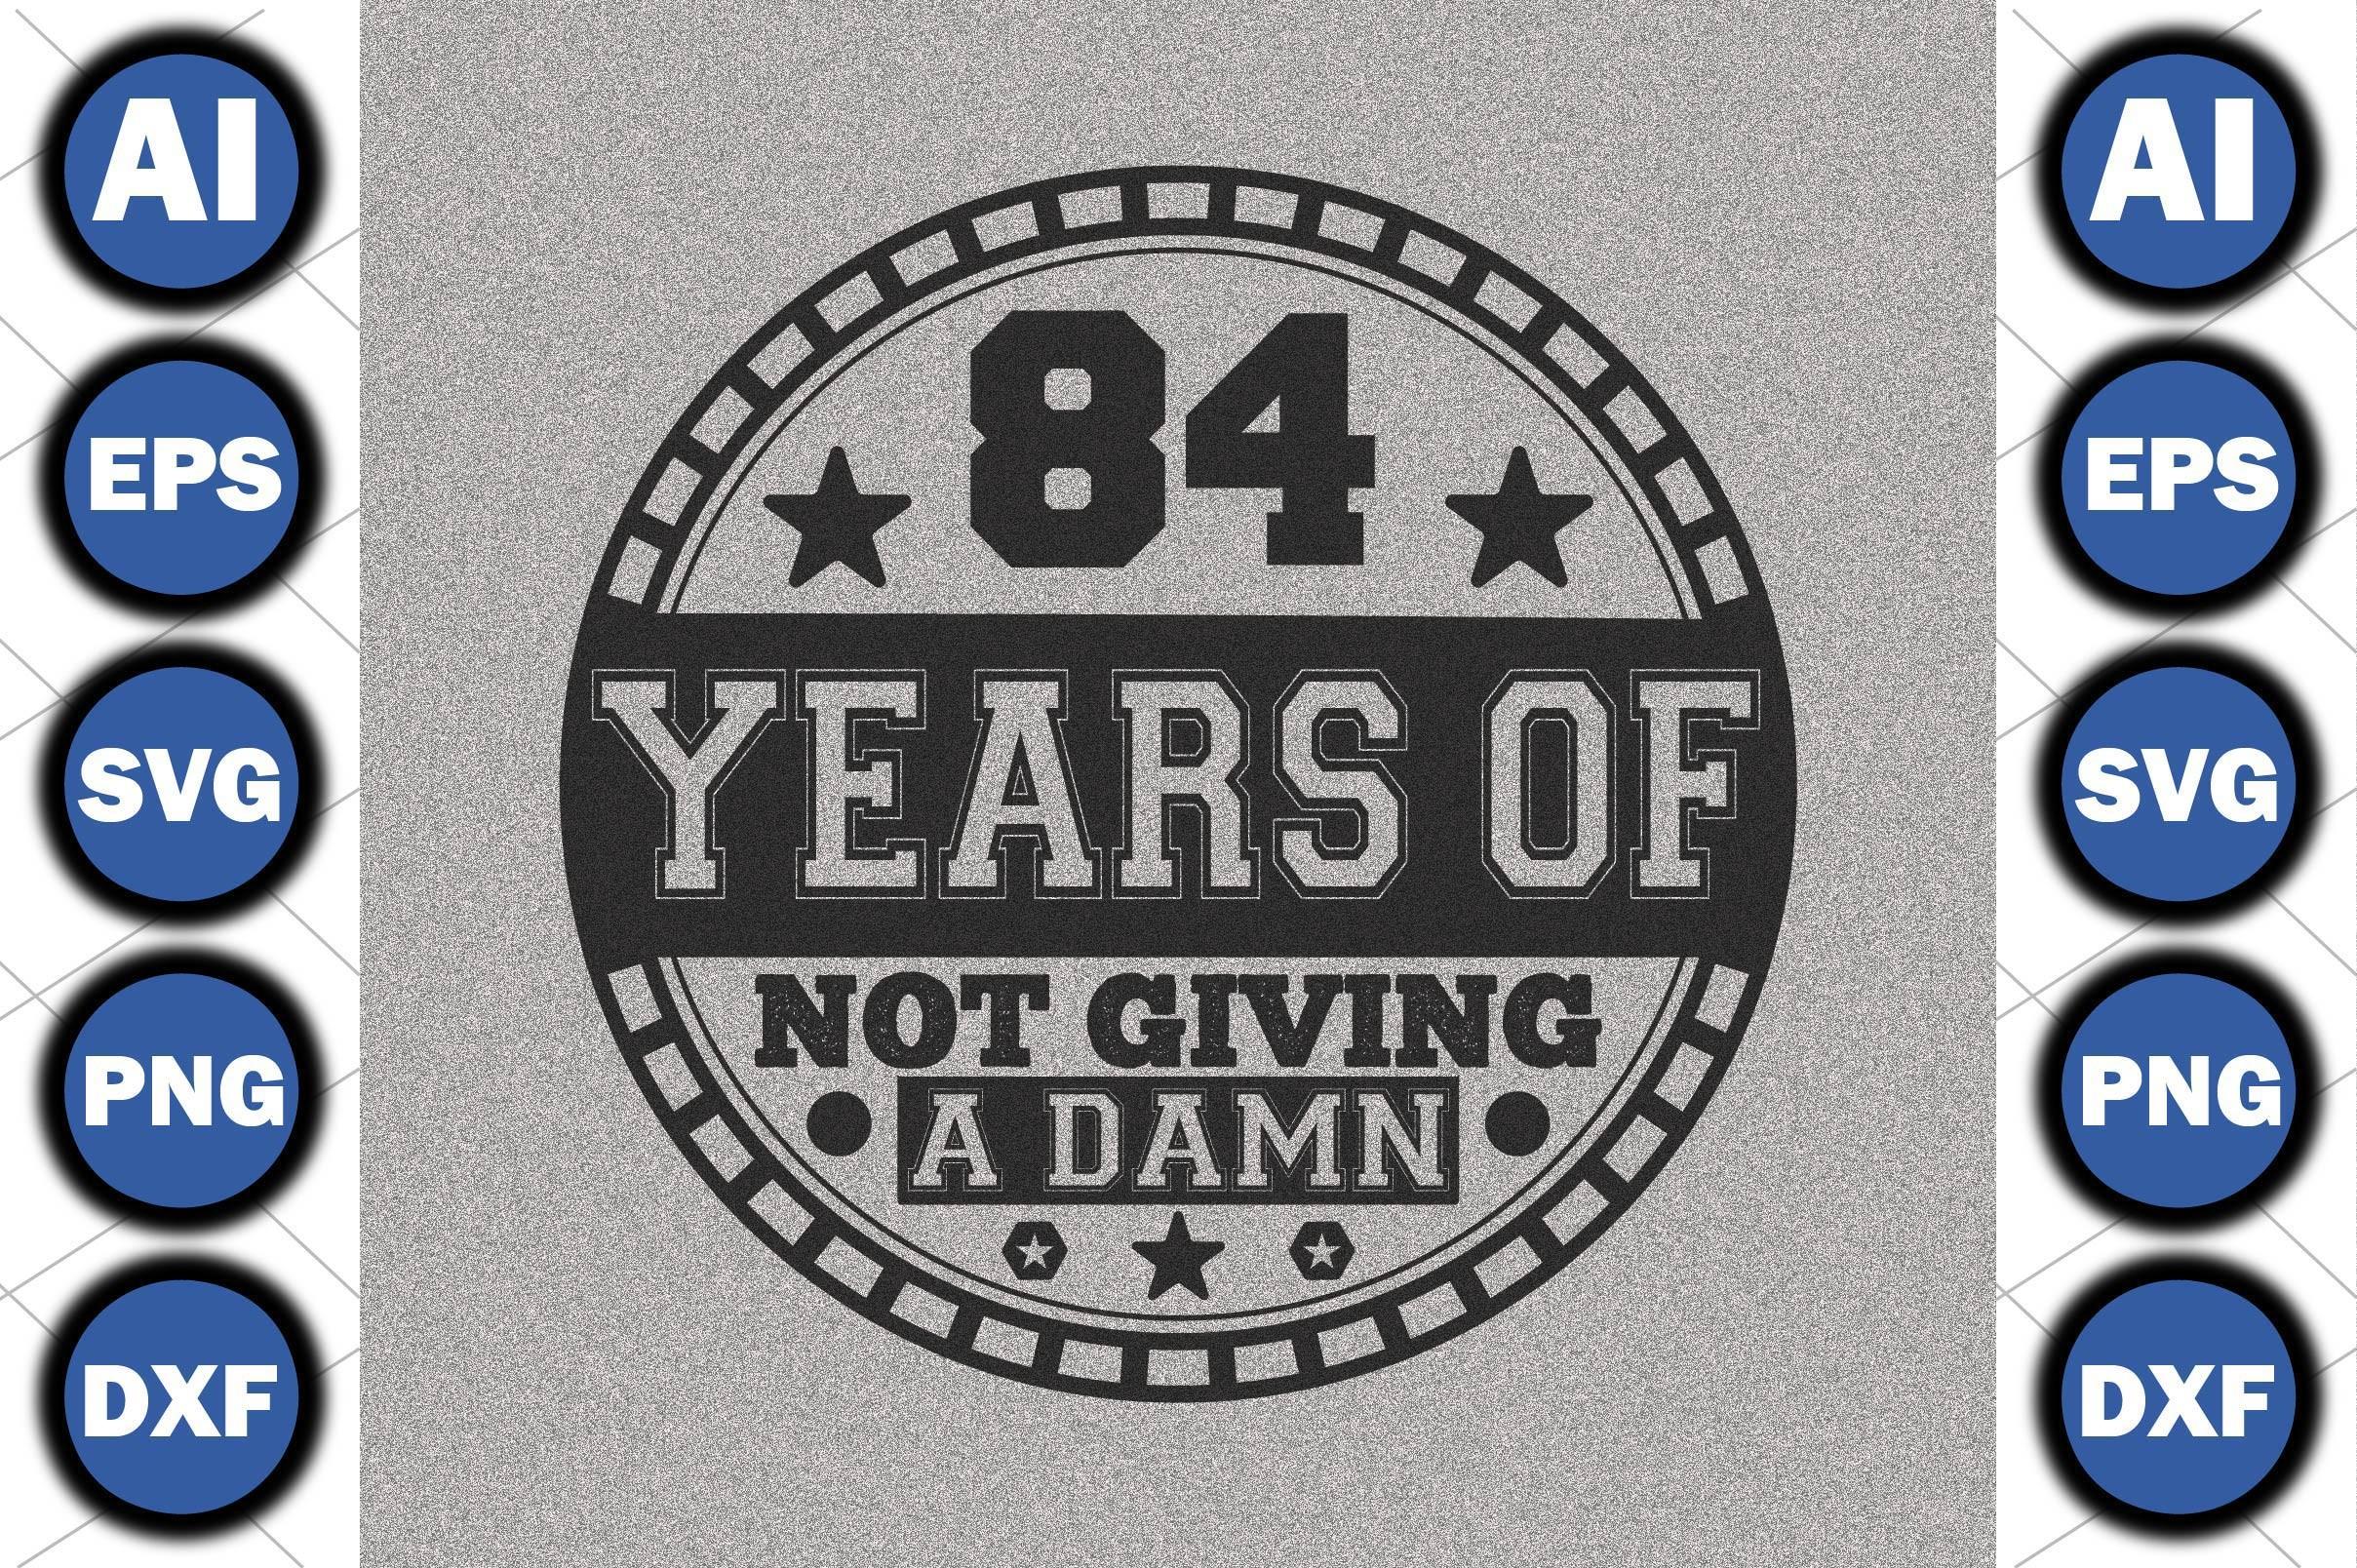 84 Years of Not Giving a Damn